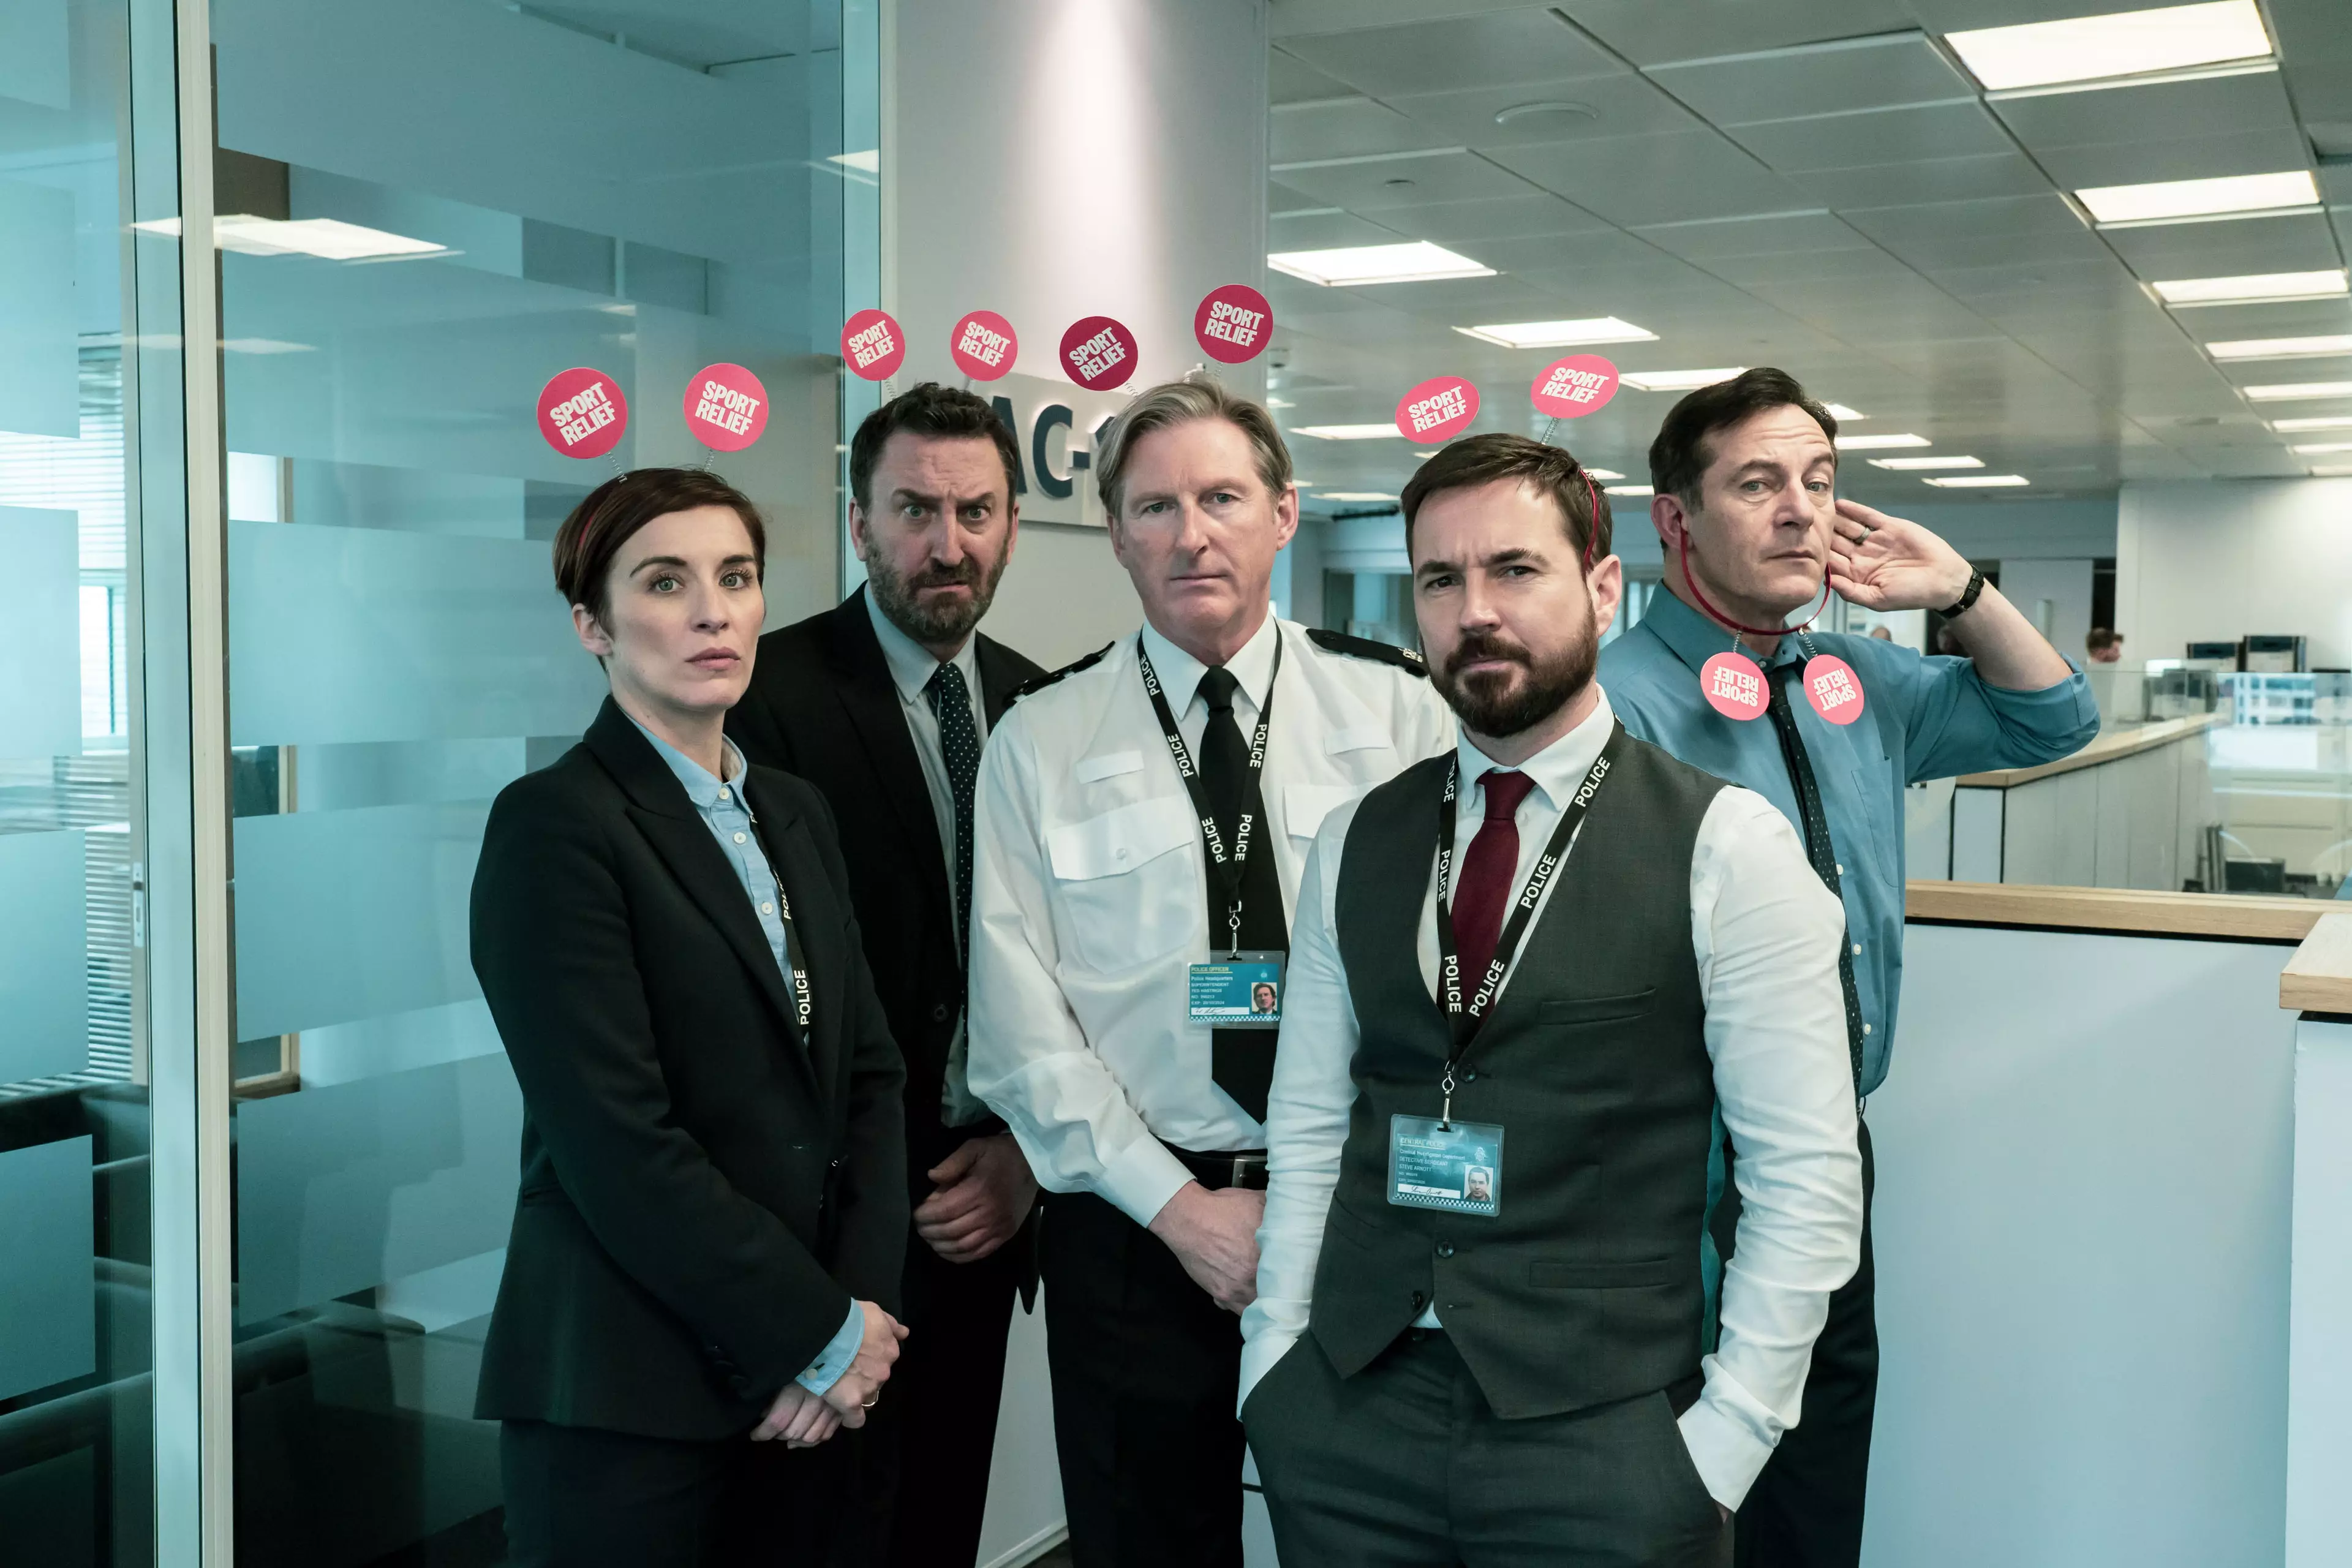 The 'Line Of Duty' cast are teaming up for Sport Relief 2020 (